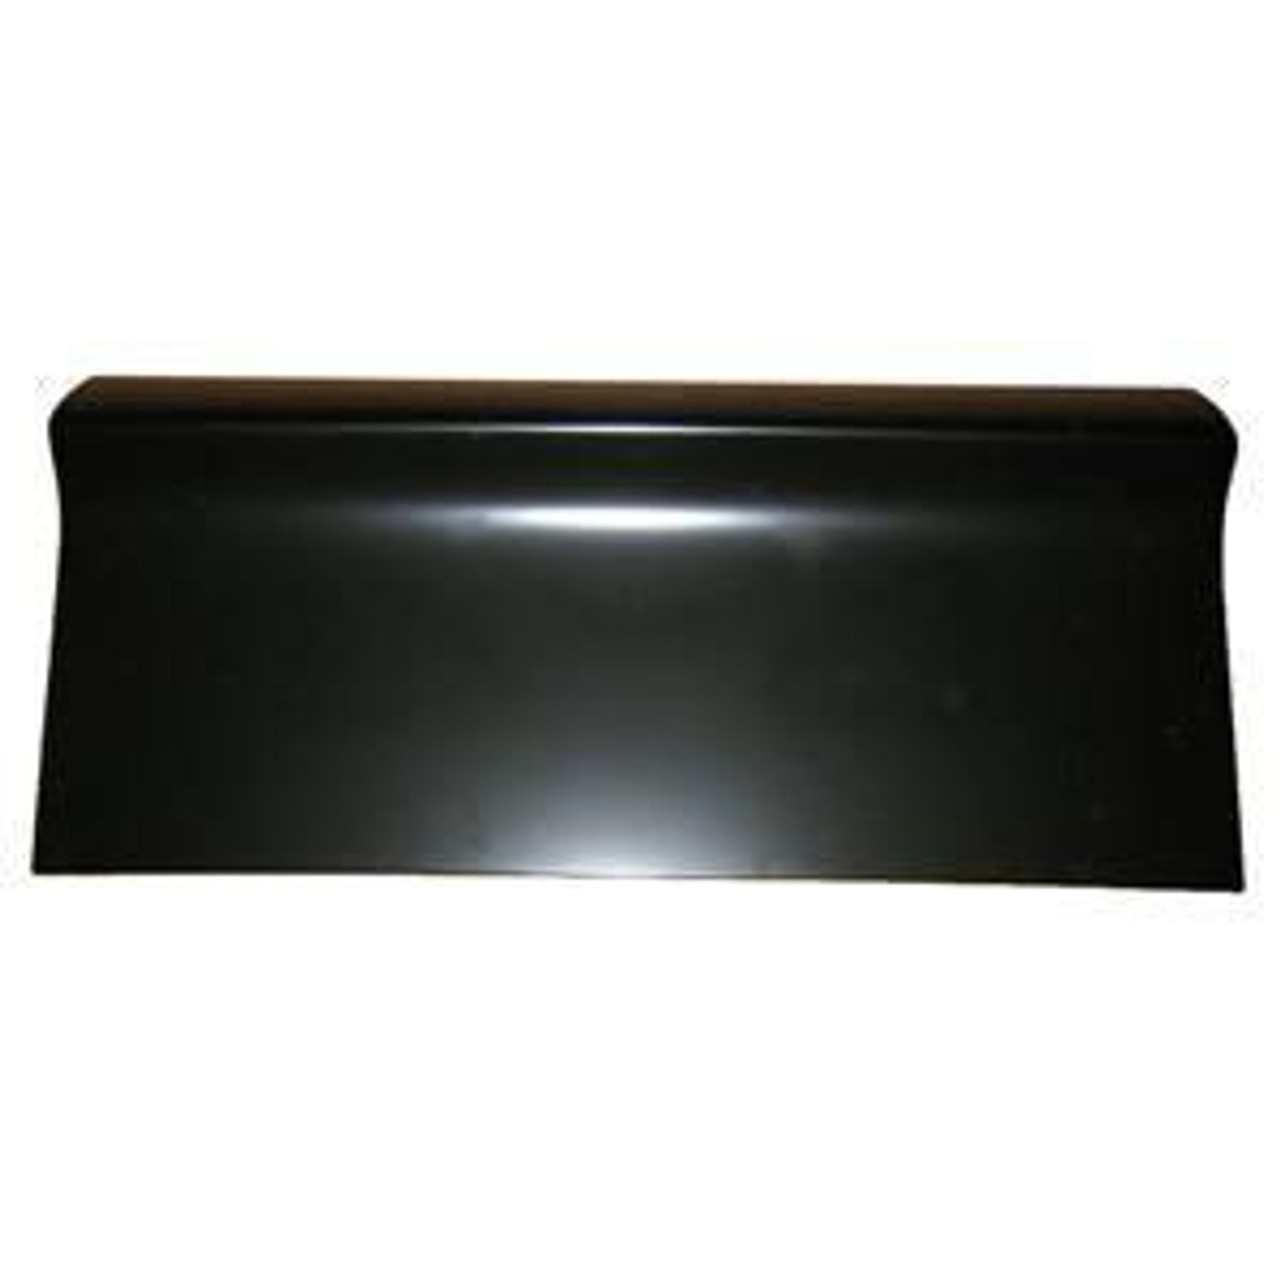 TRUNK LID FASTBACK/ 69-70 MUSTANG